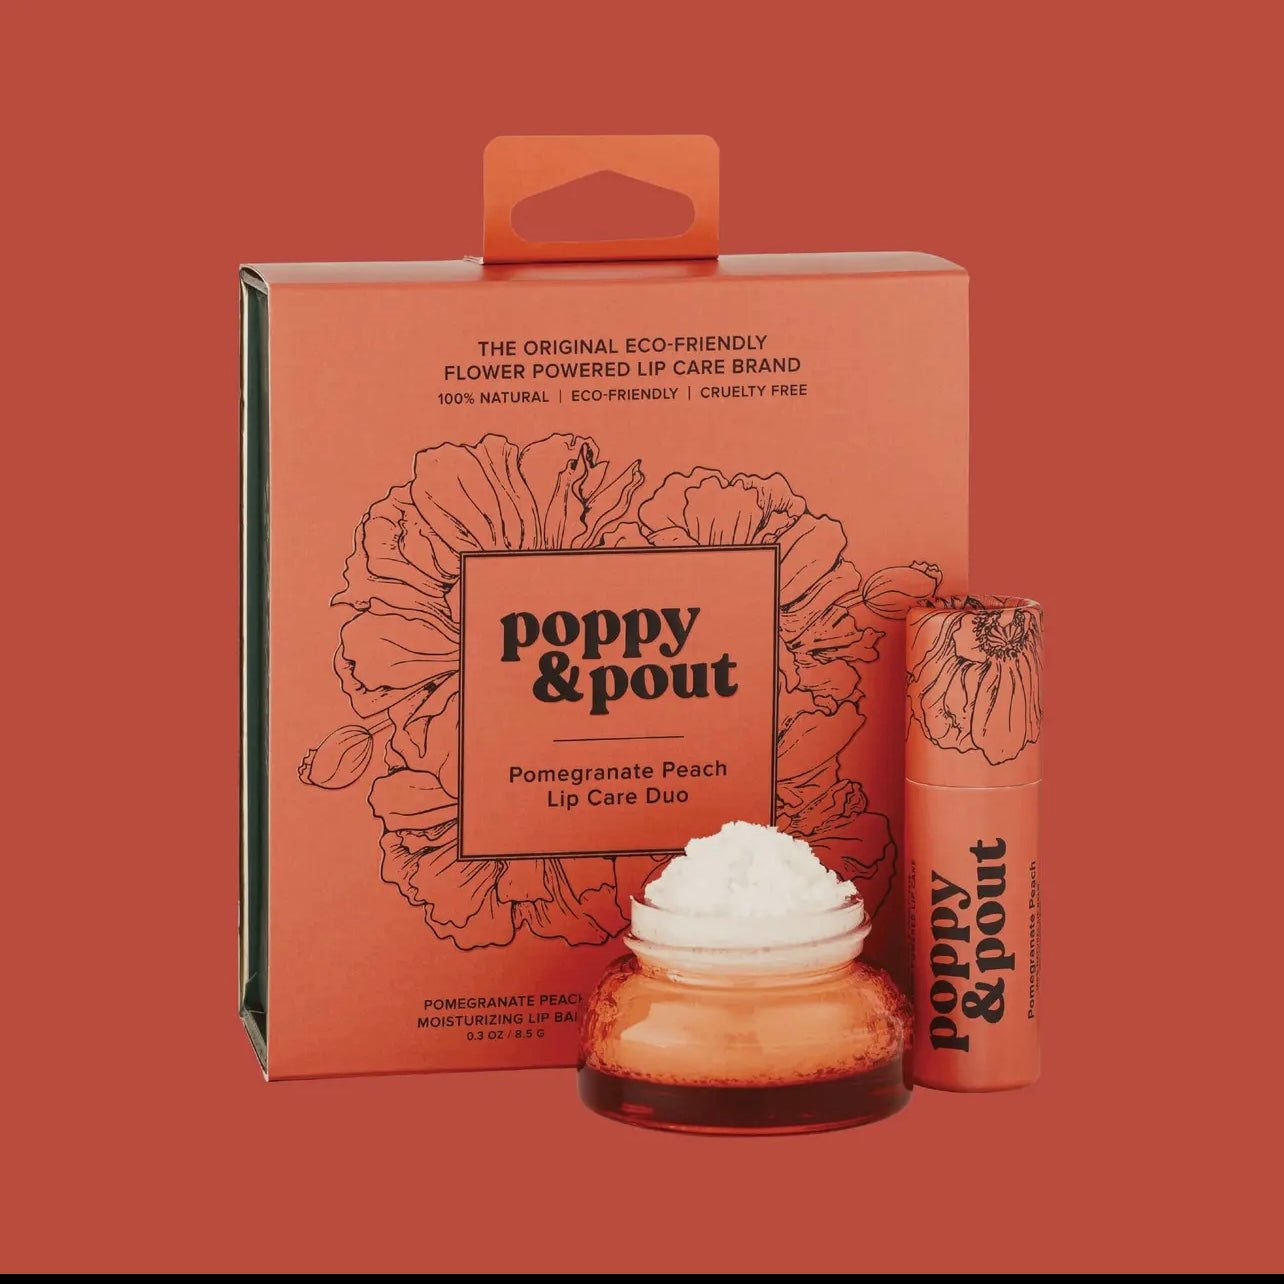 Poppy+Pout Lip Care Duo